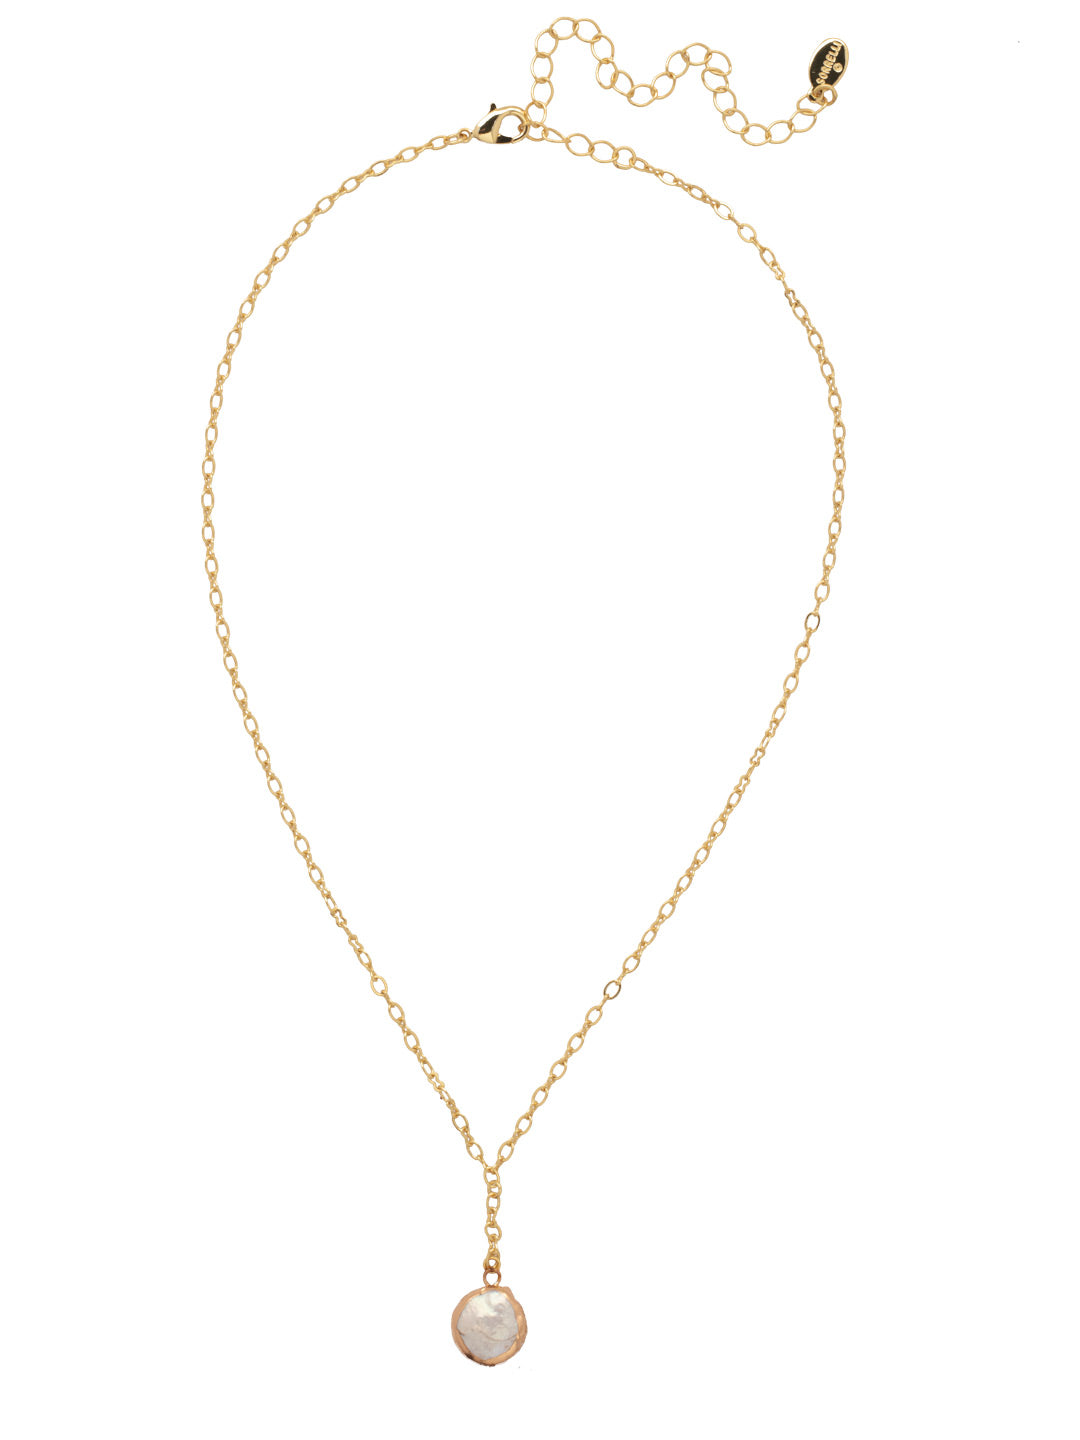 Penny Pearl Pendant Necklace - NFM19BGMDP - <p>The Penny Pearl Pendant Necklace features a single freshwater coin pearl dangling from an adjustable Y chain secured with a lobster claw clasp. From Sorrelli's Modern Pearl collection in our Bright Gold-tone finish.</p>